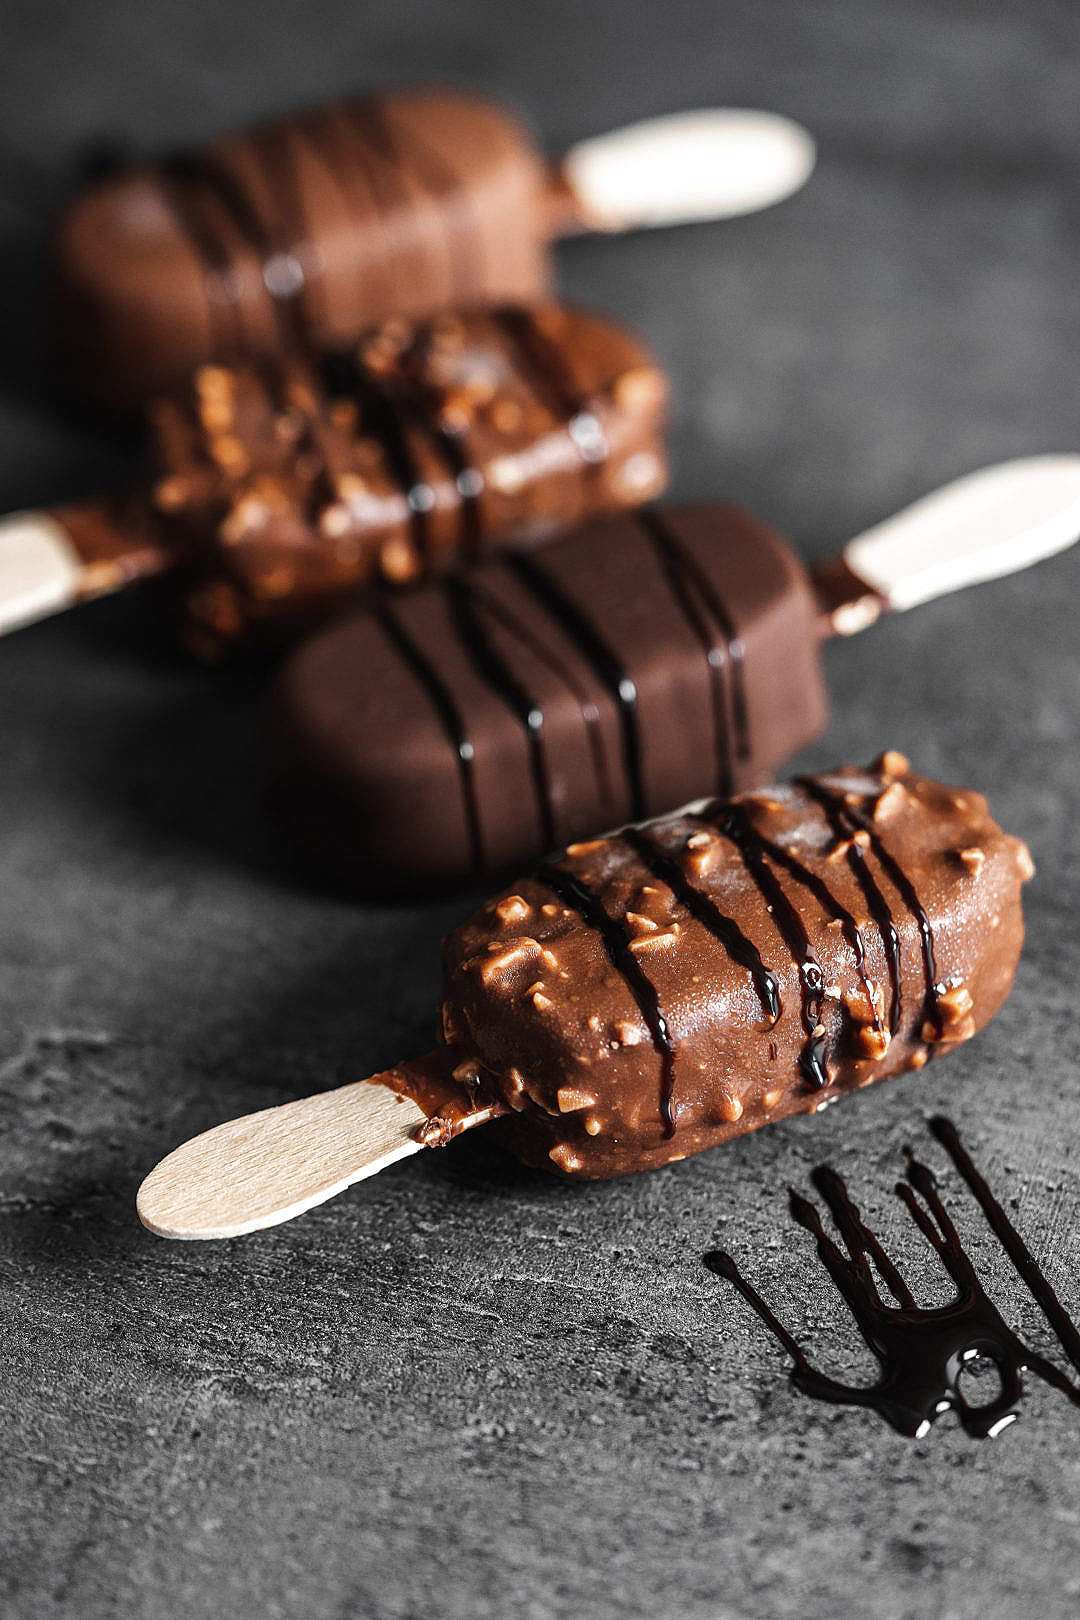 Download Chocolate Ice Lolly Vertical FREE Stock Photo